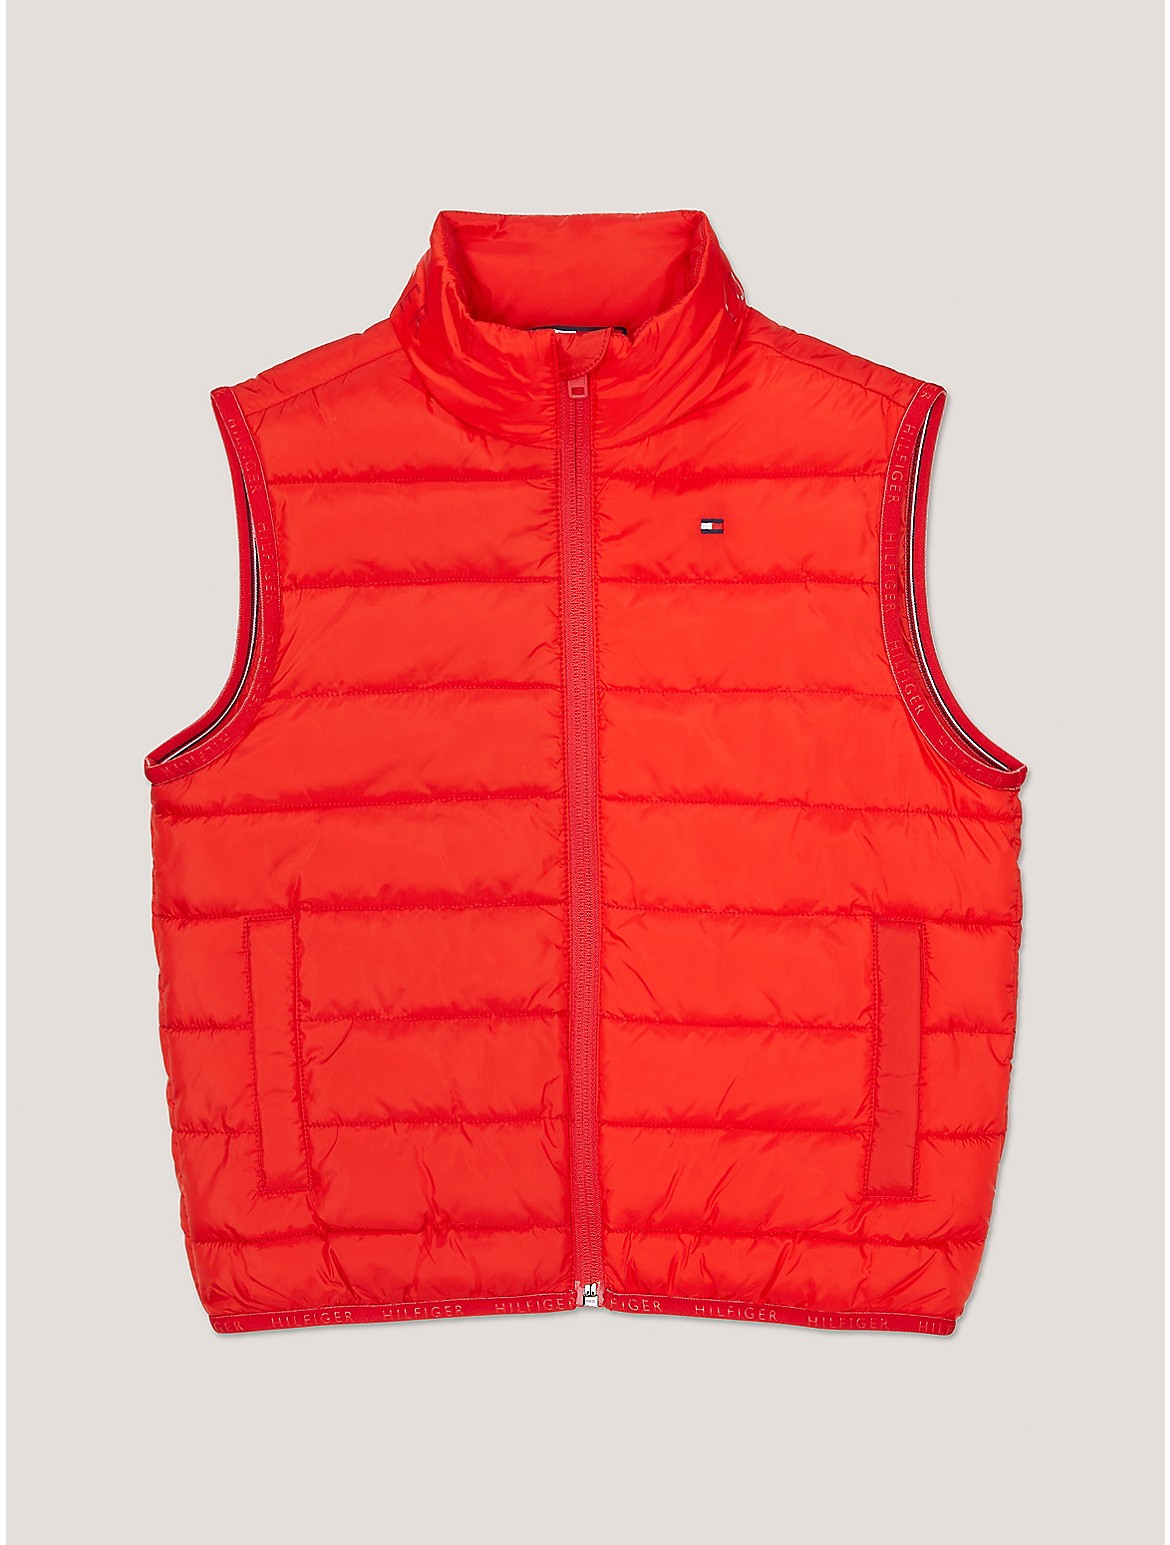 Tommy Hilfiger Boys' Kids' Insulated Vest - Red - XS